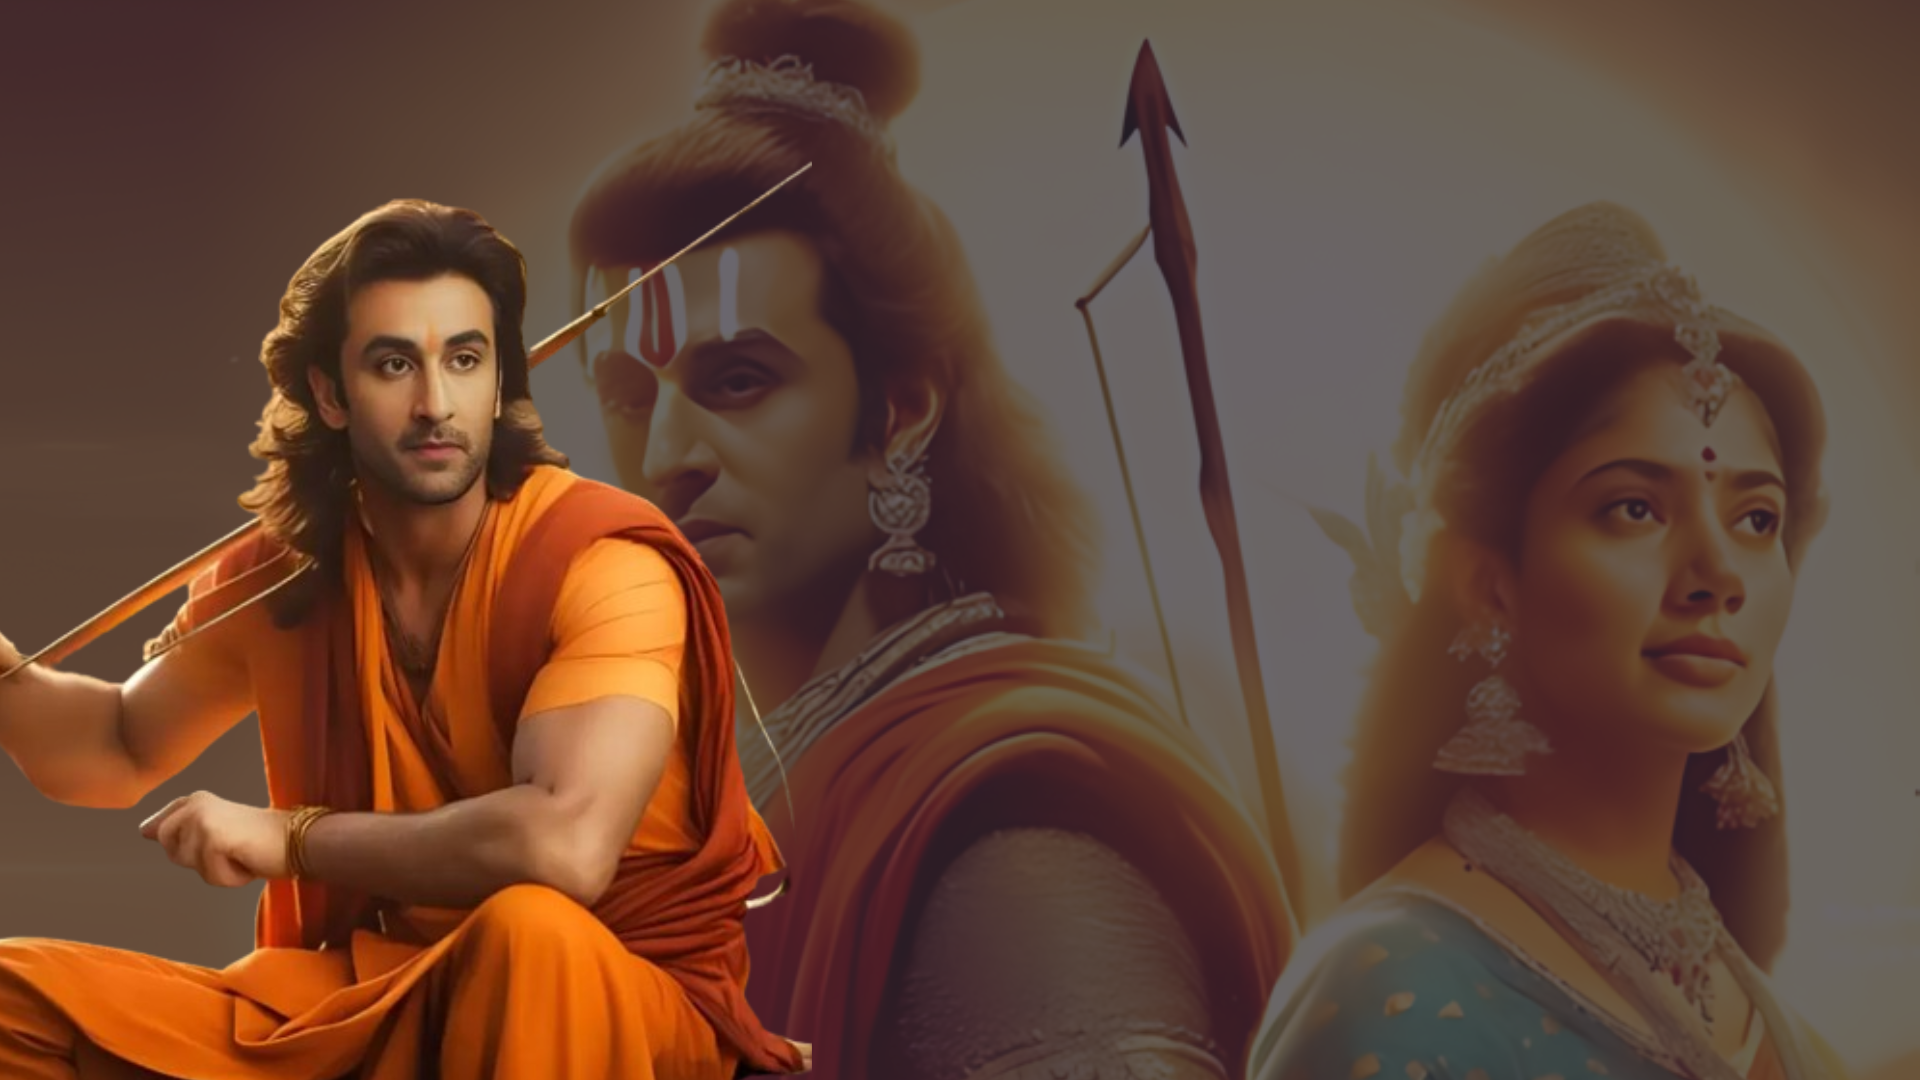 Has Ranbir Kapoor & Sai Pallavi Starrer ‘Ramayana’ Landed In Another Legal Trouble? This Producer Is Threatening To Sue Makers Over Due Payments